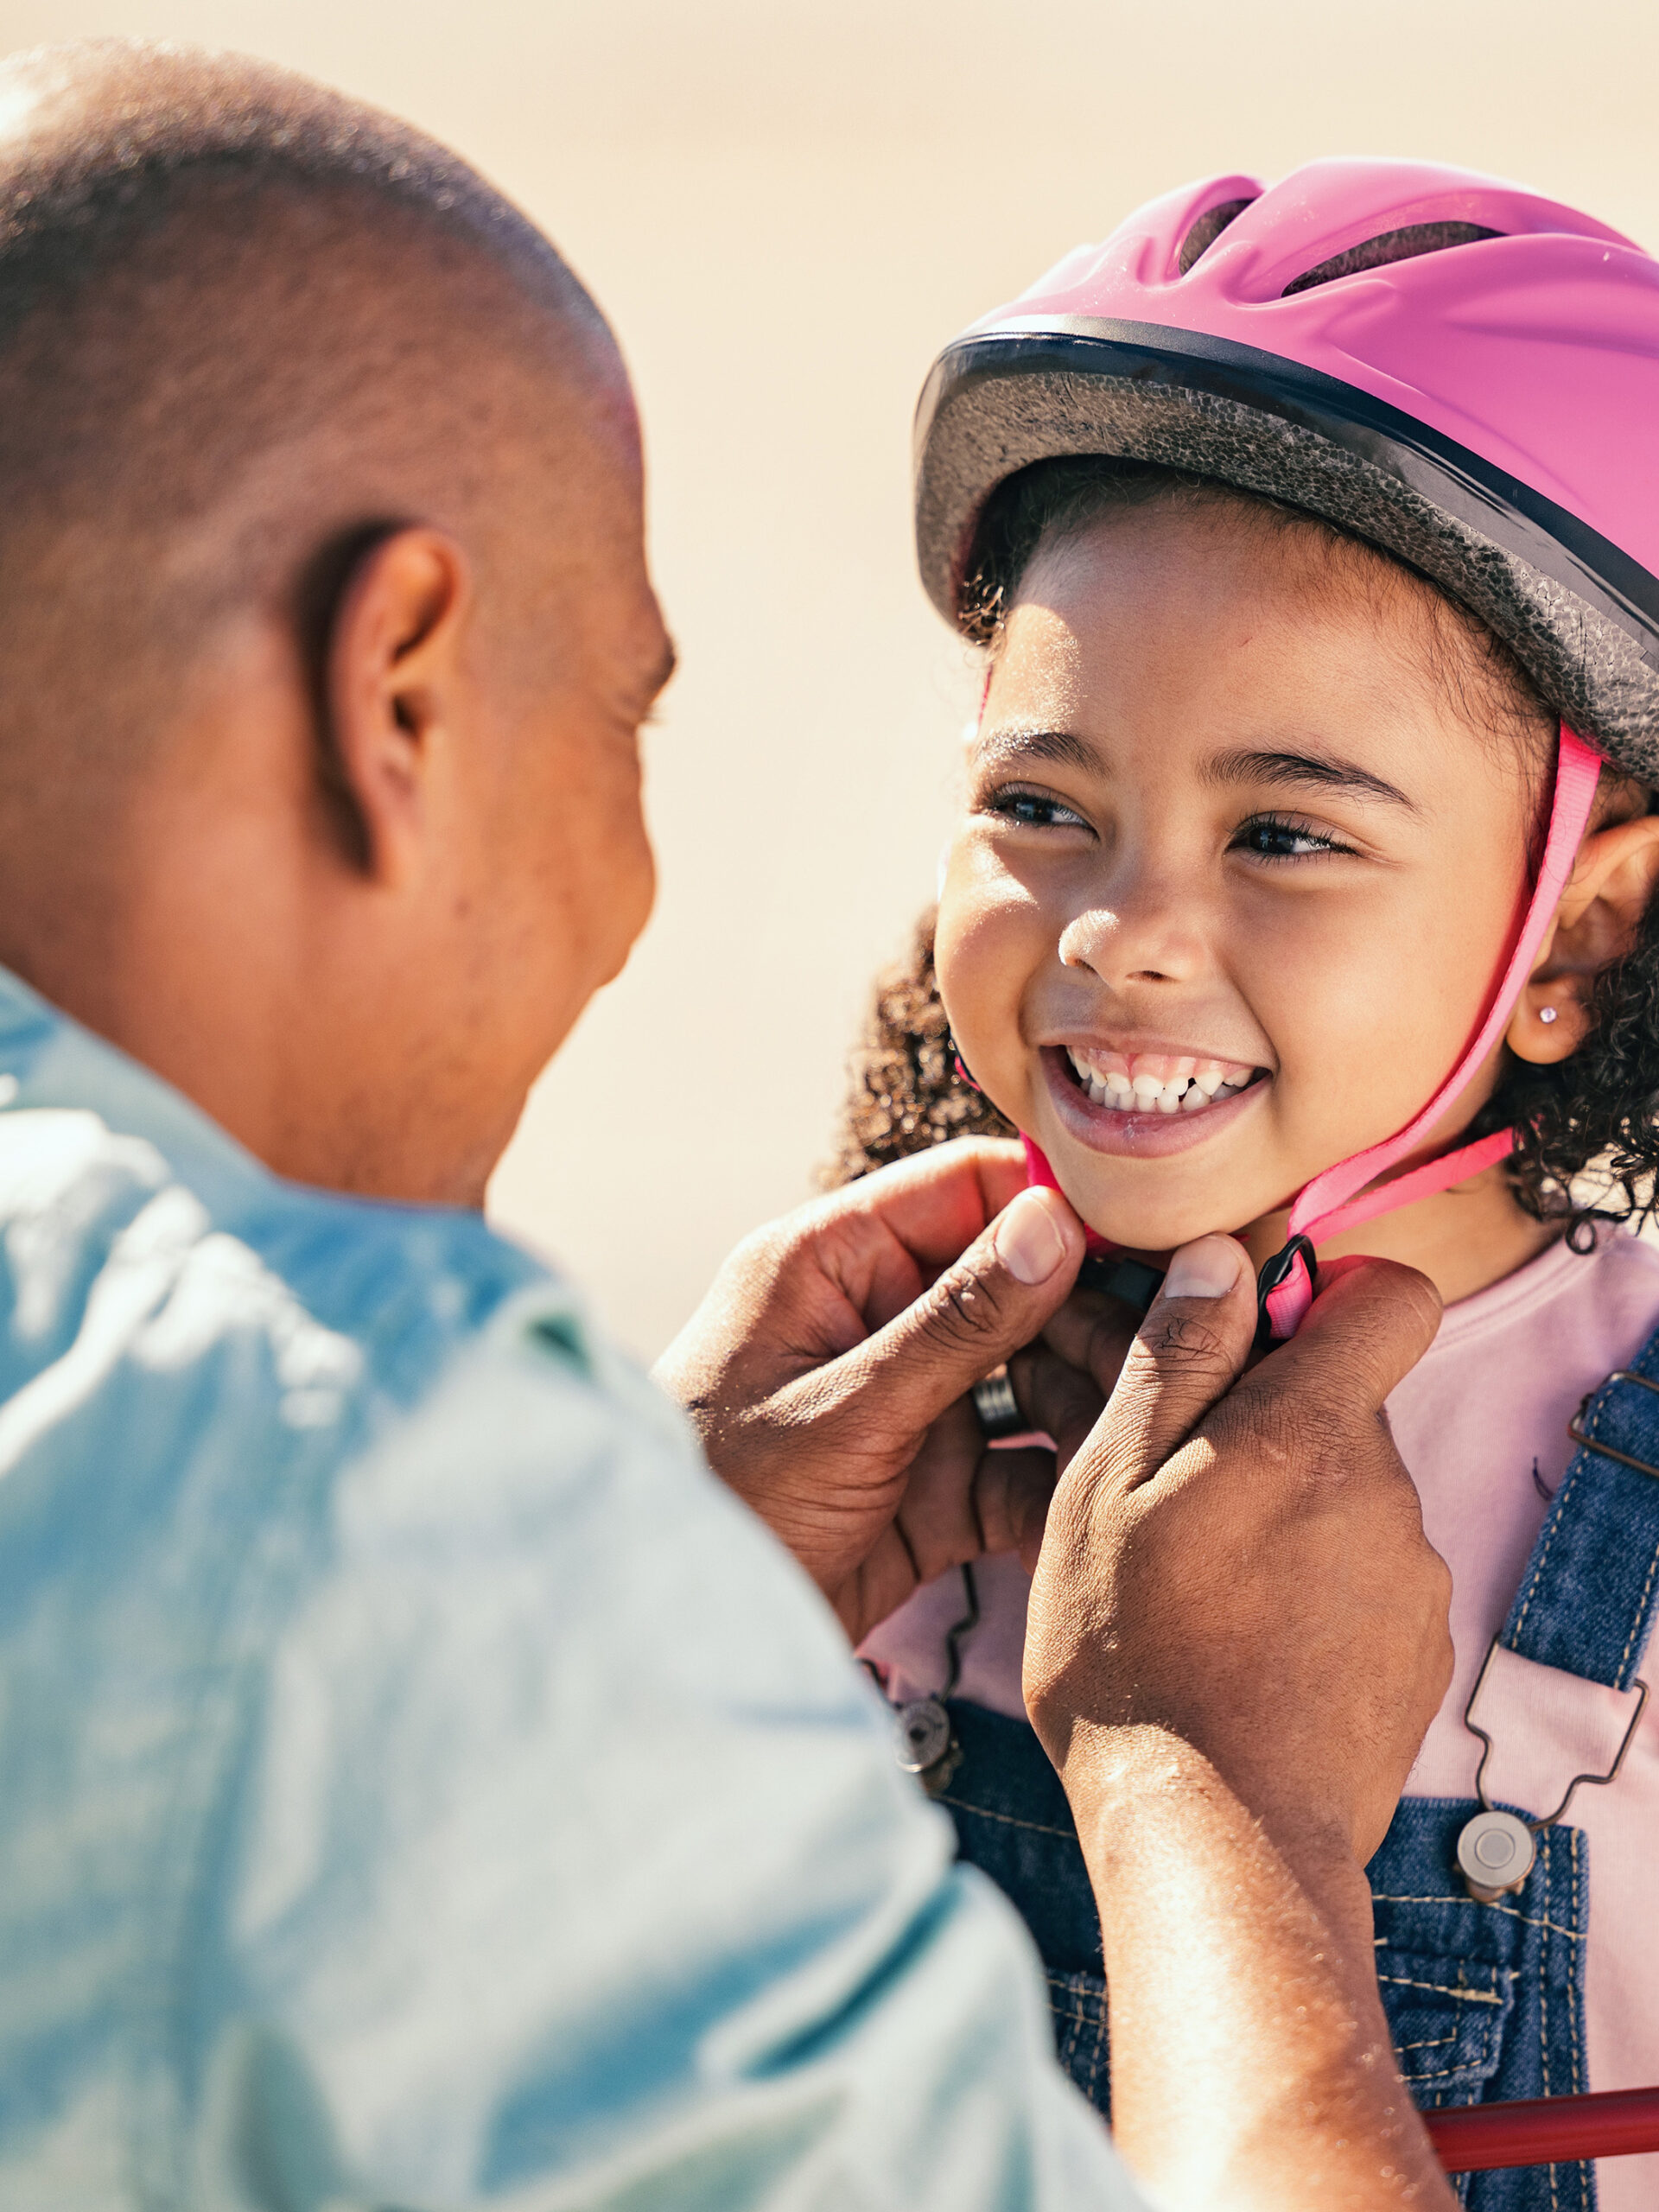 Parent helping child put on helmet - safety activities for kids